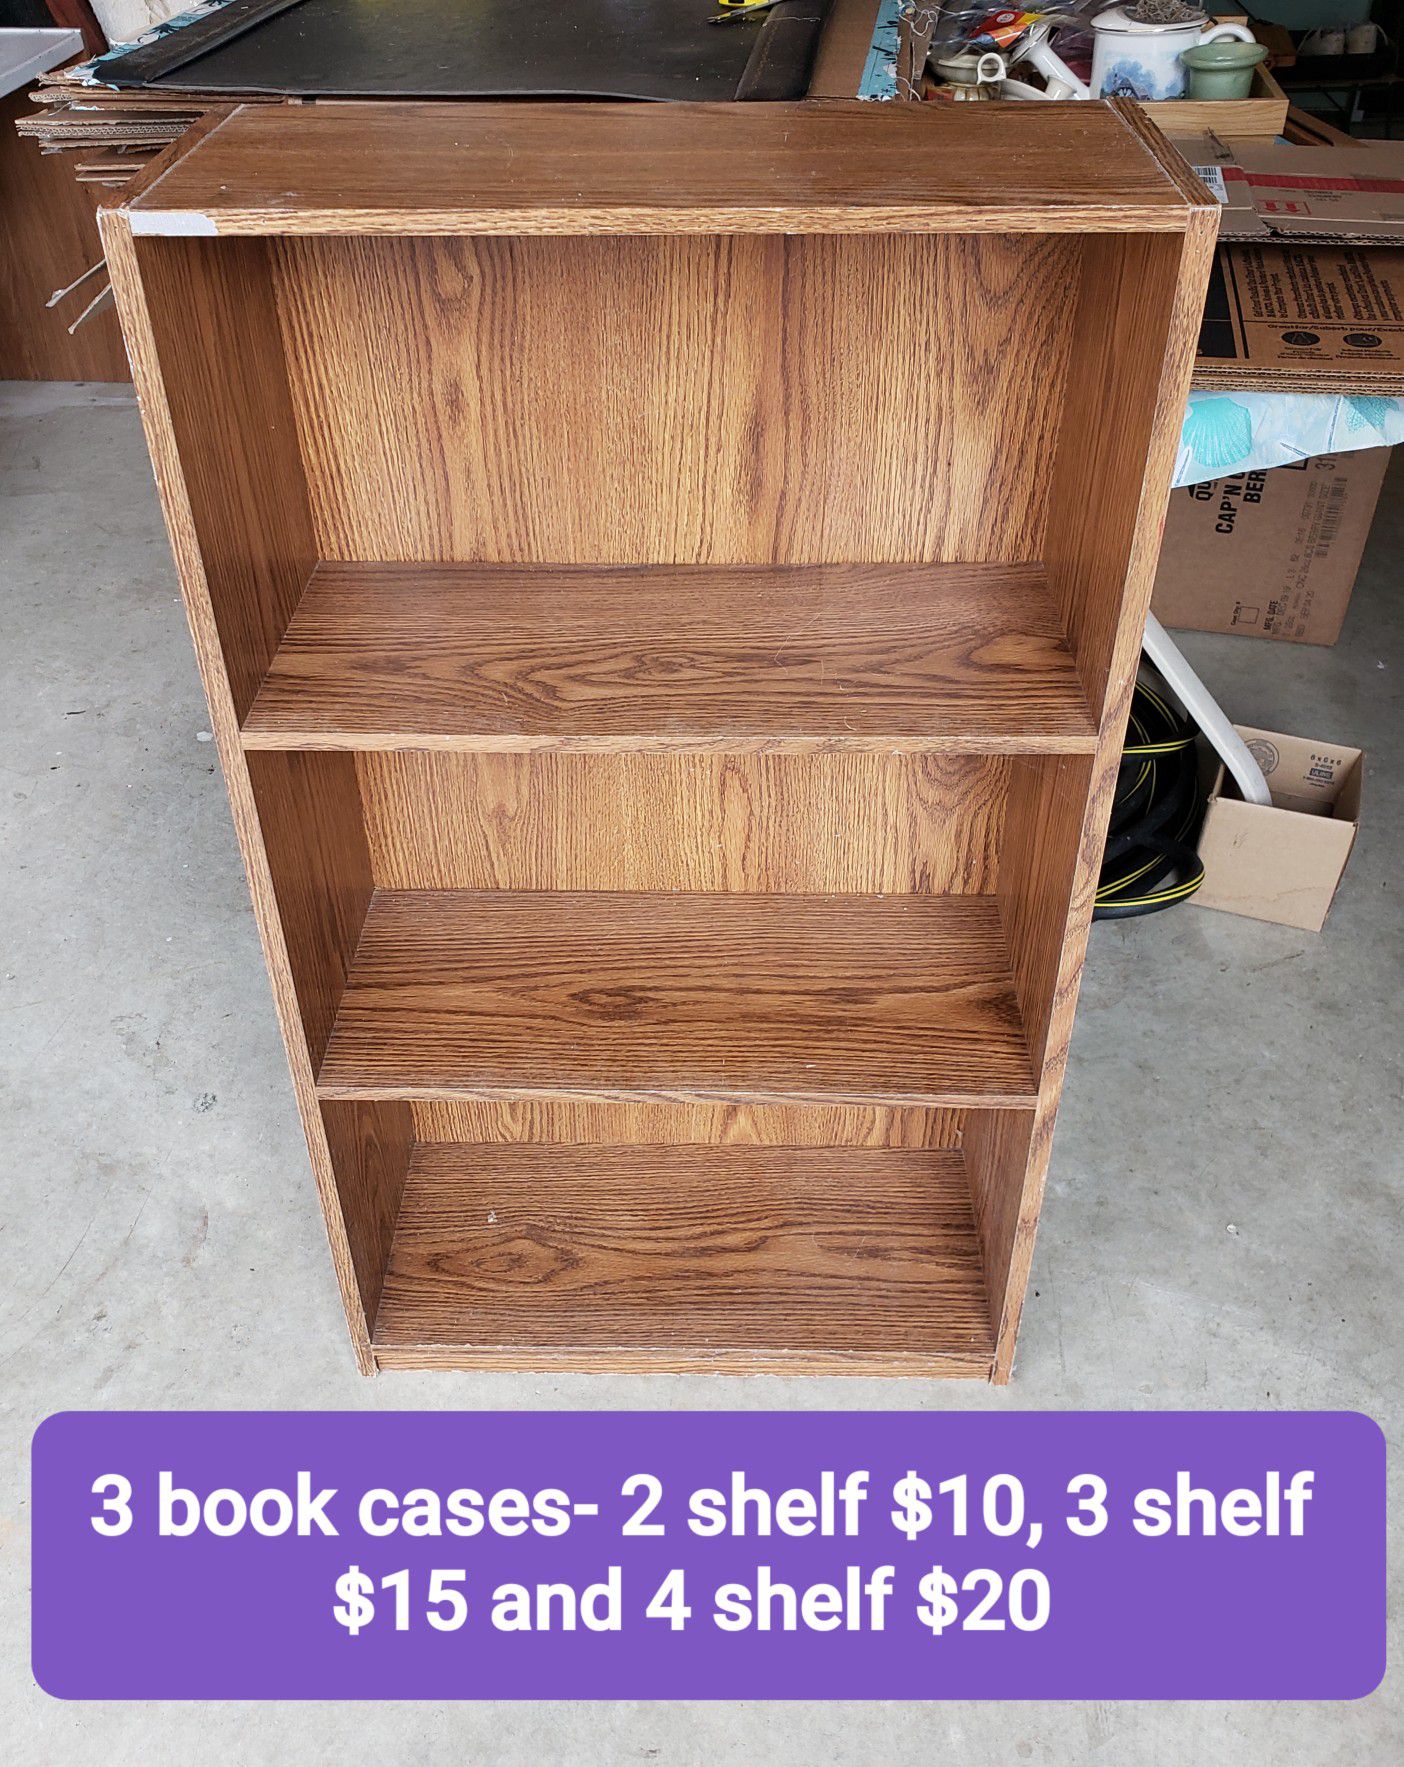 3 book cases different sizes